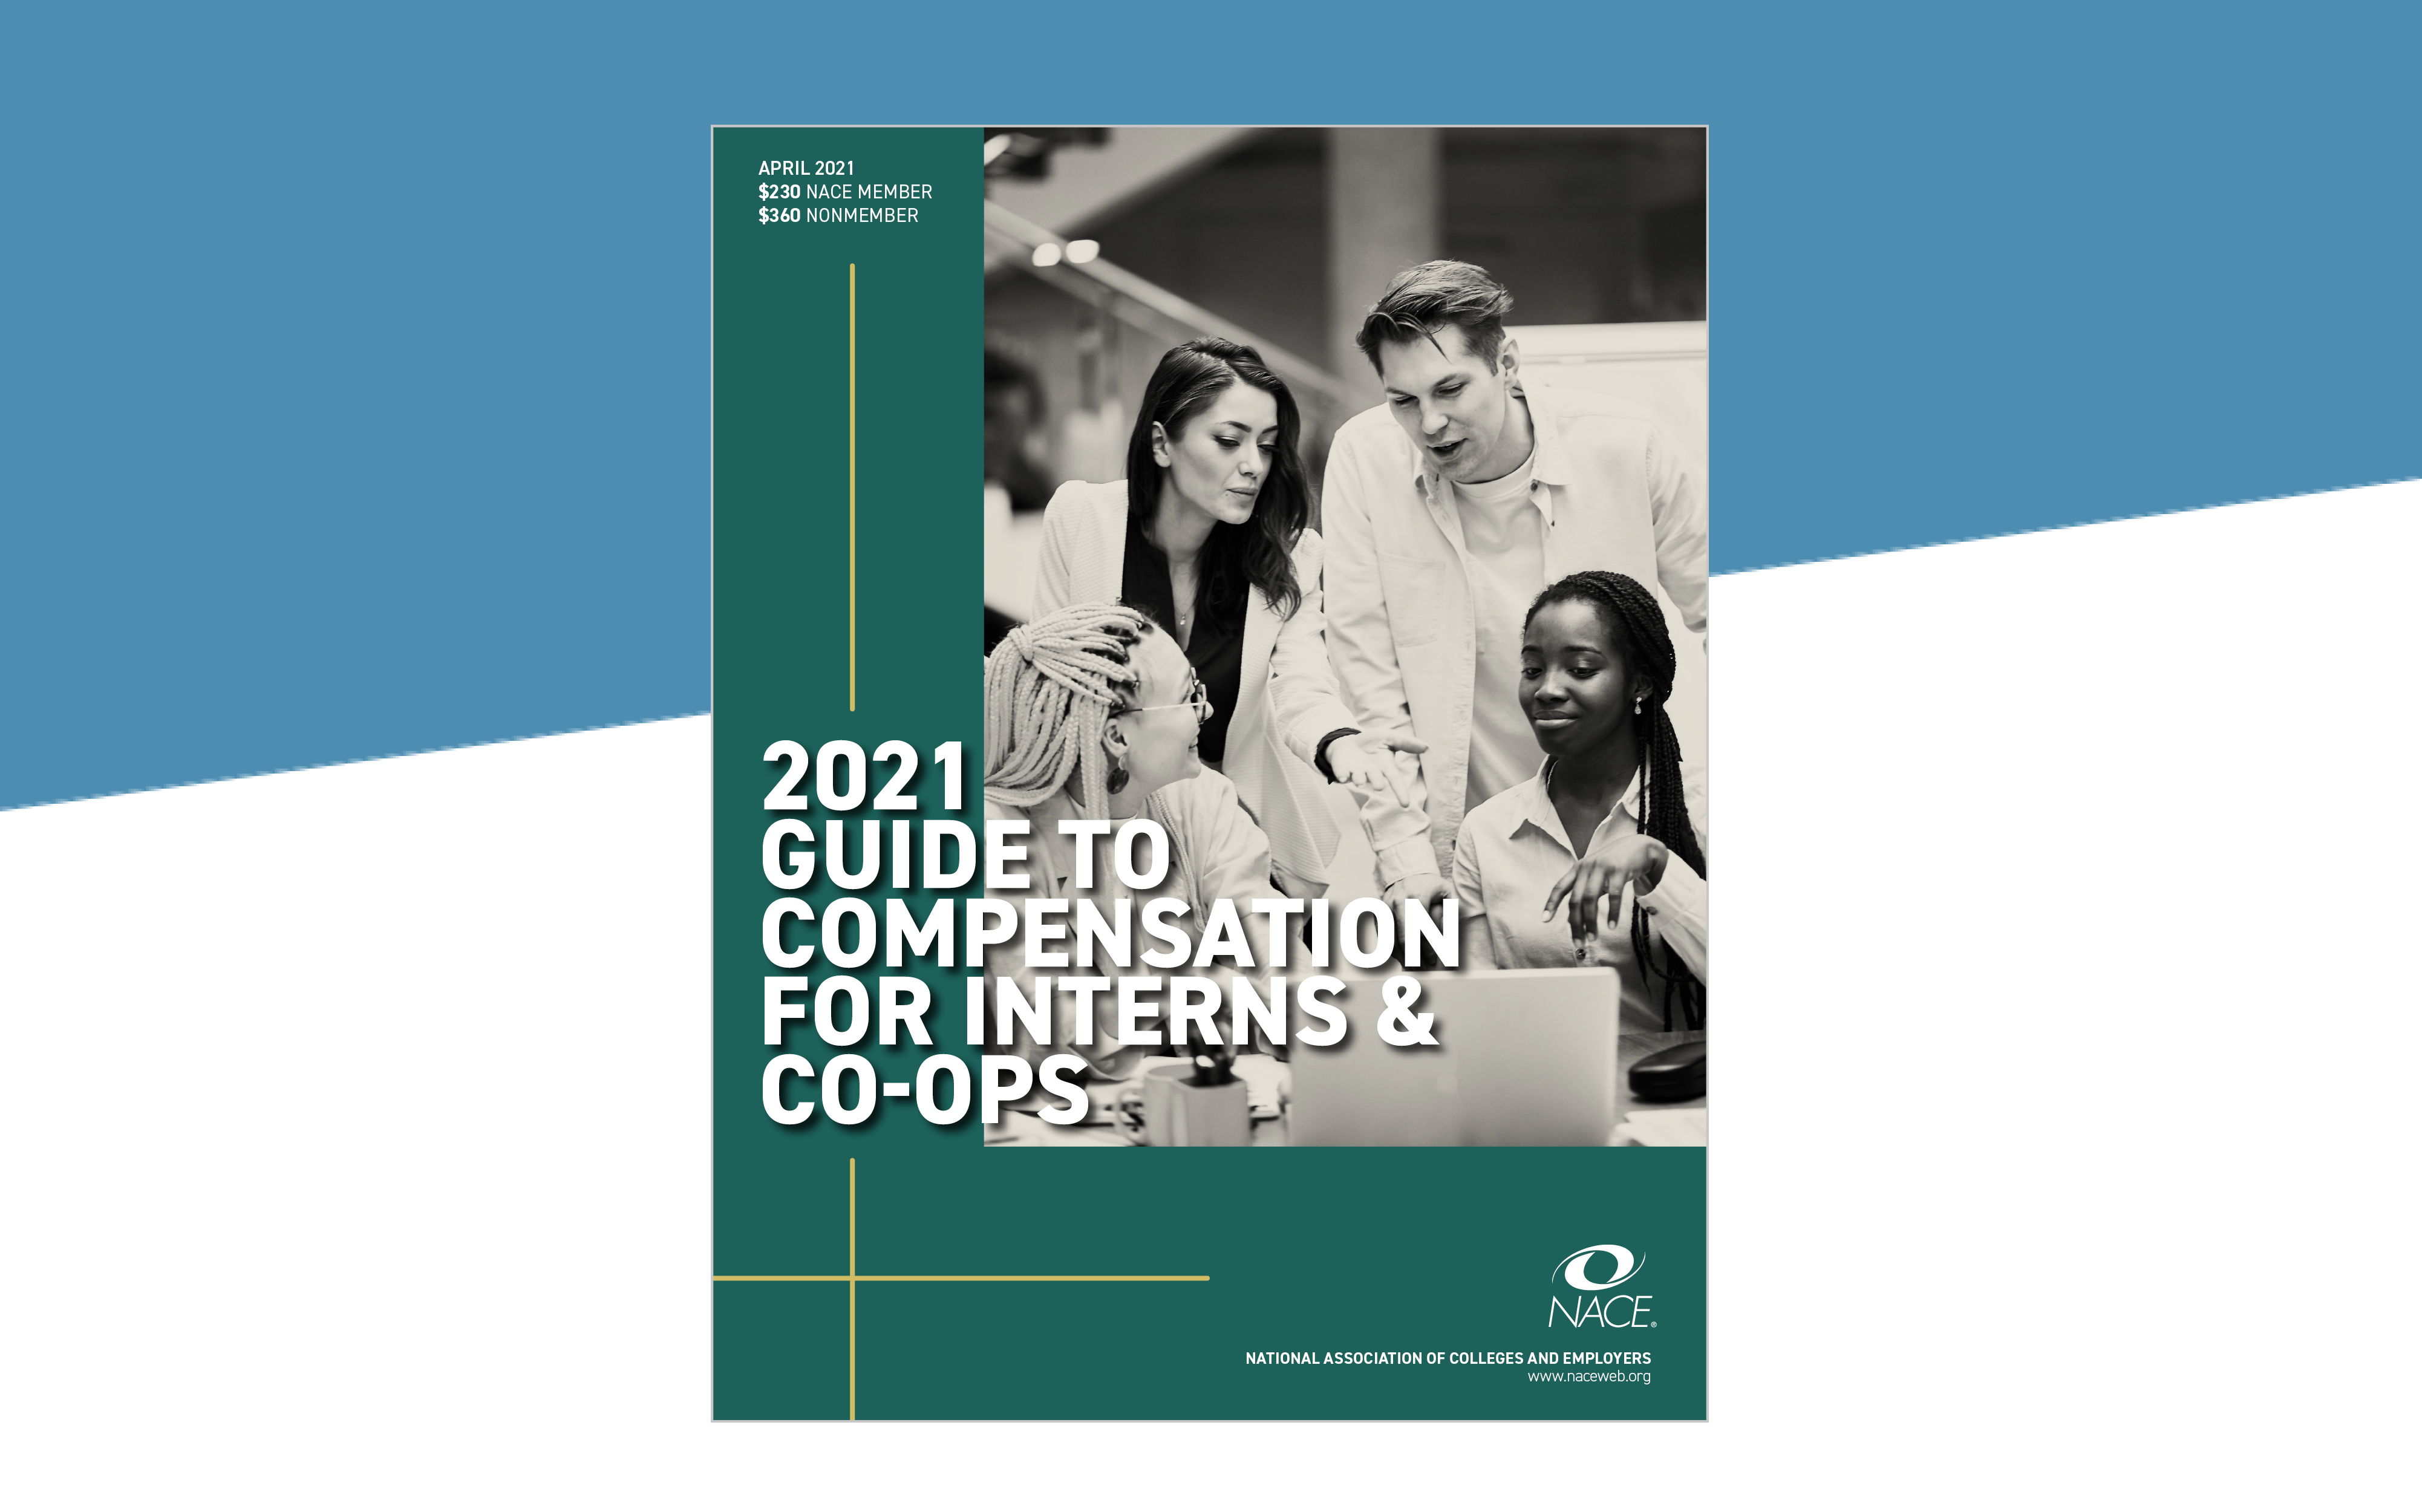 Guide to Compensation for Interns & Co-ops 2021